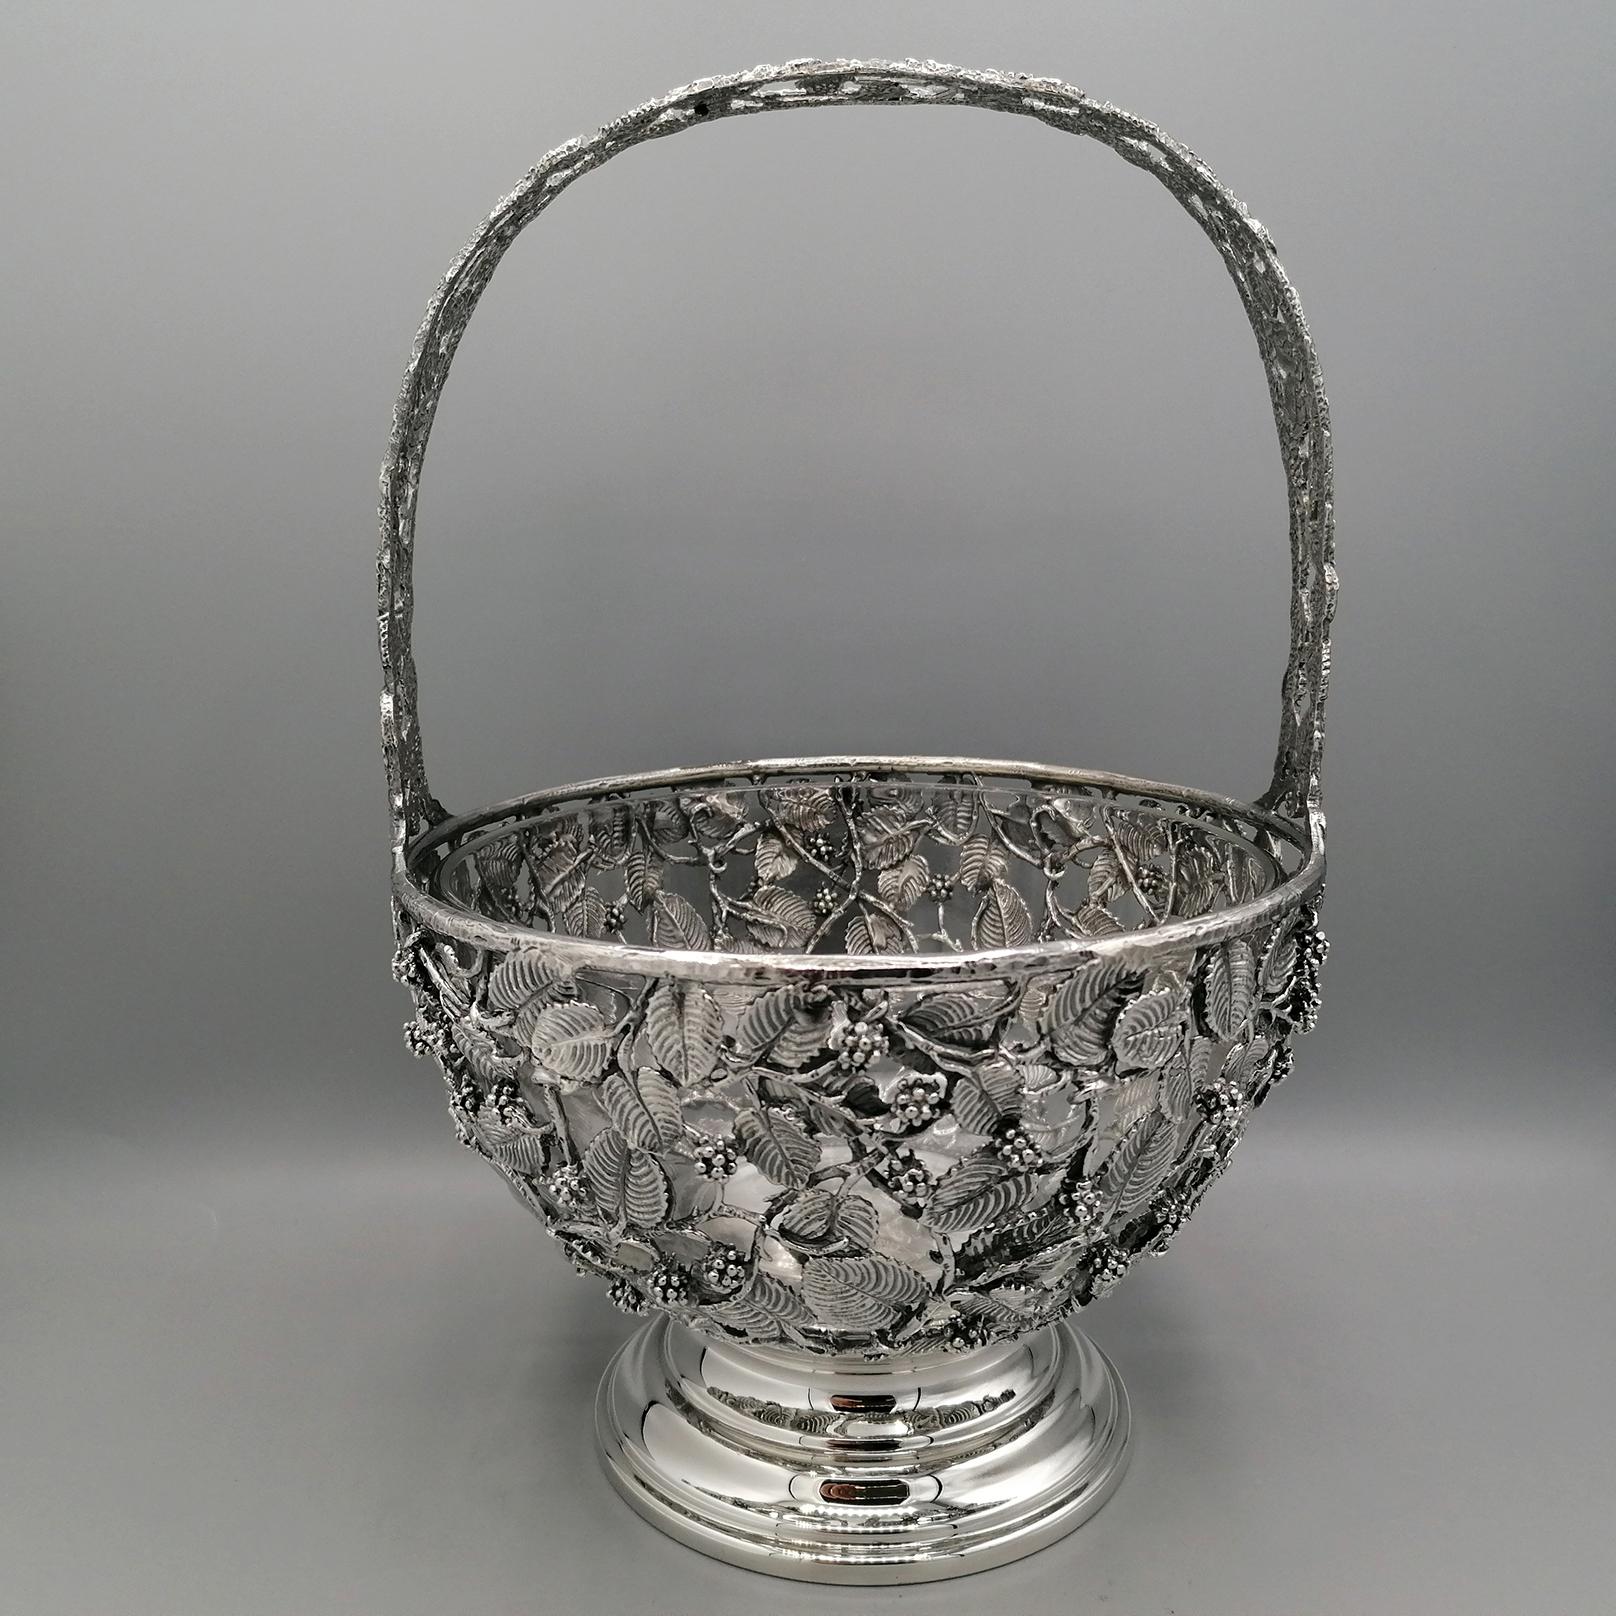 20th Century Italian Basket  sterling silver pierced with blackberries and leaves.  For Sale 10